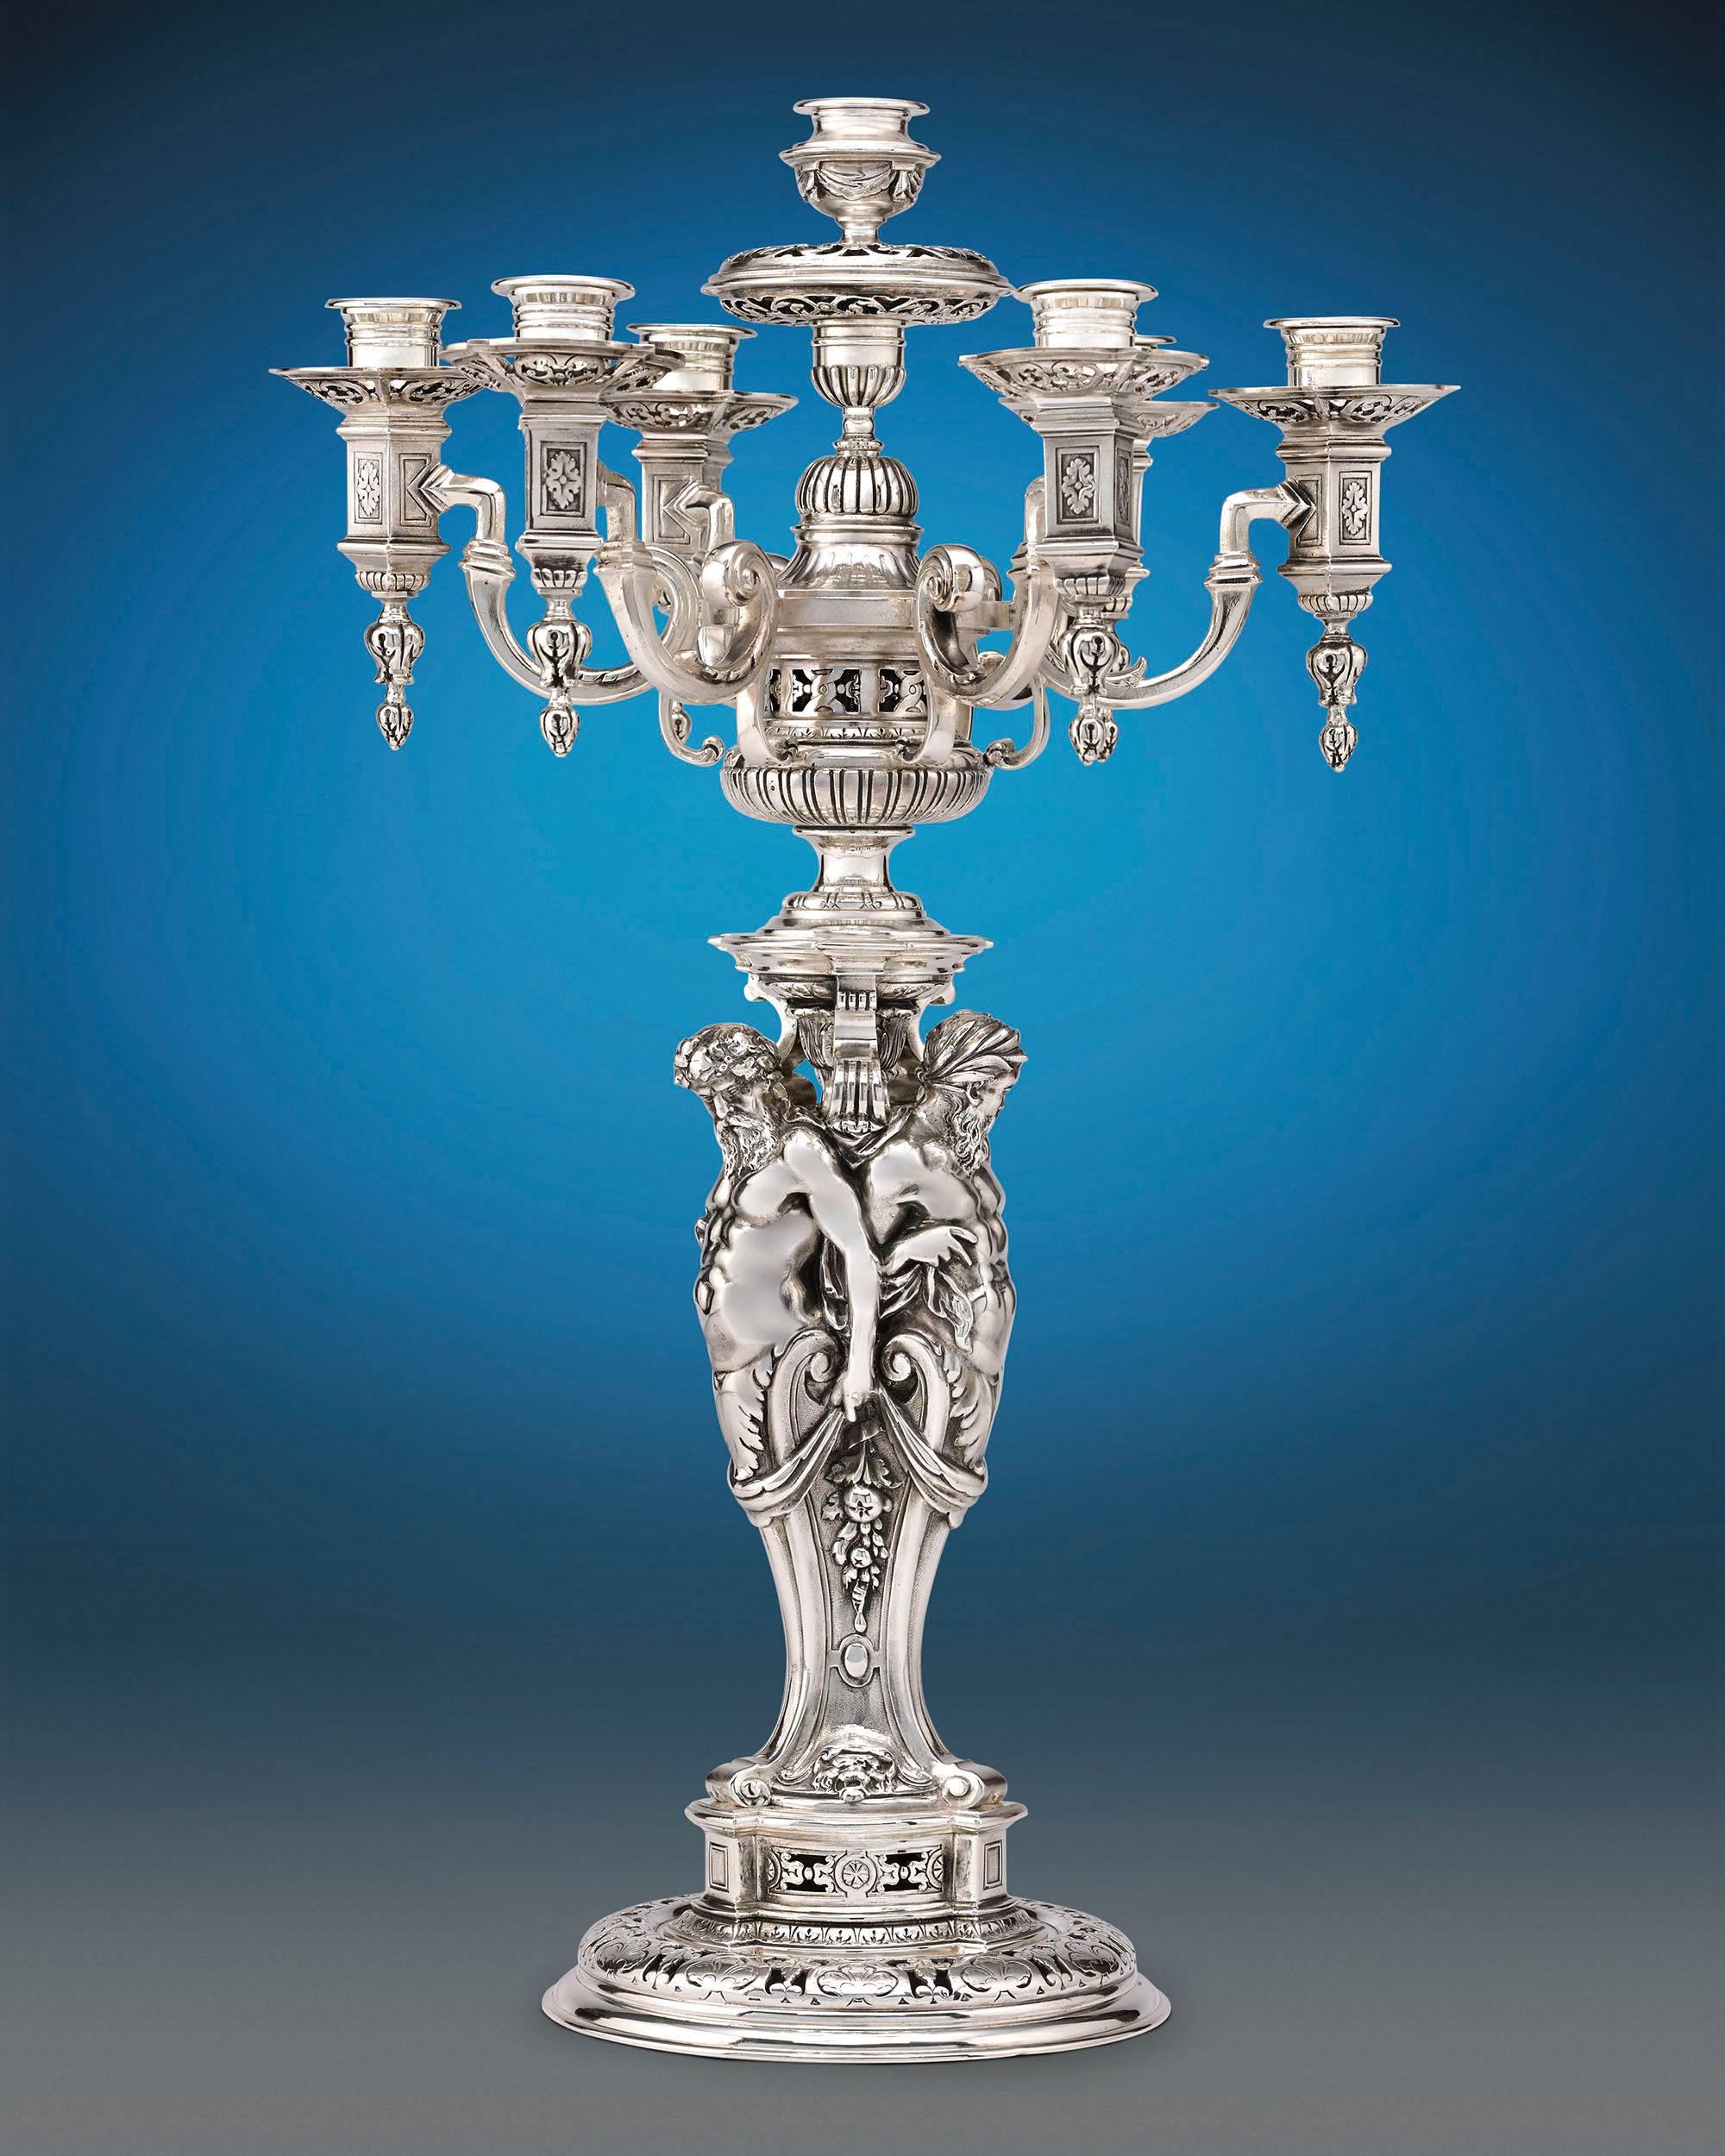 Beautiful specimens of Renaissance Revival design, this regal pair of silver plated candelabra were crafted by the legendary Parisian silver firm of Puiforcat. Majestic pierced and architectural elements distinguish the pair's design, which is